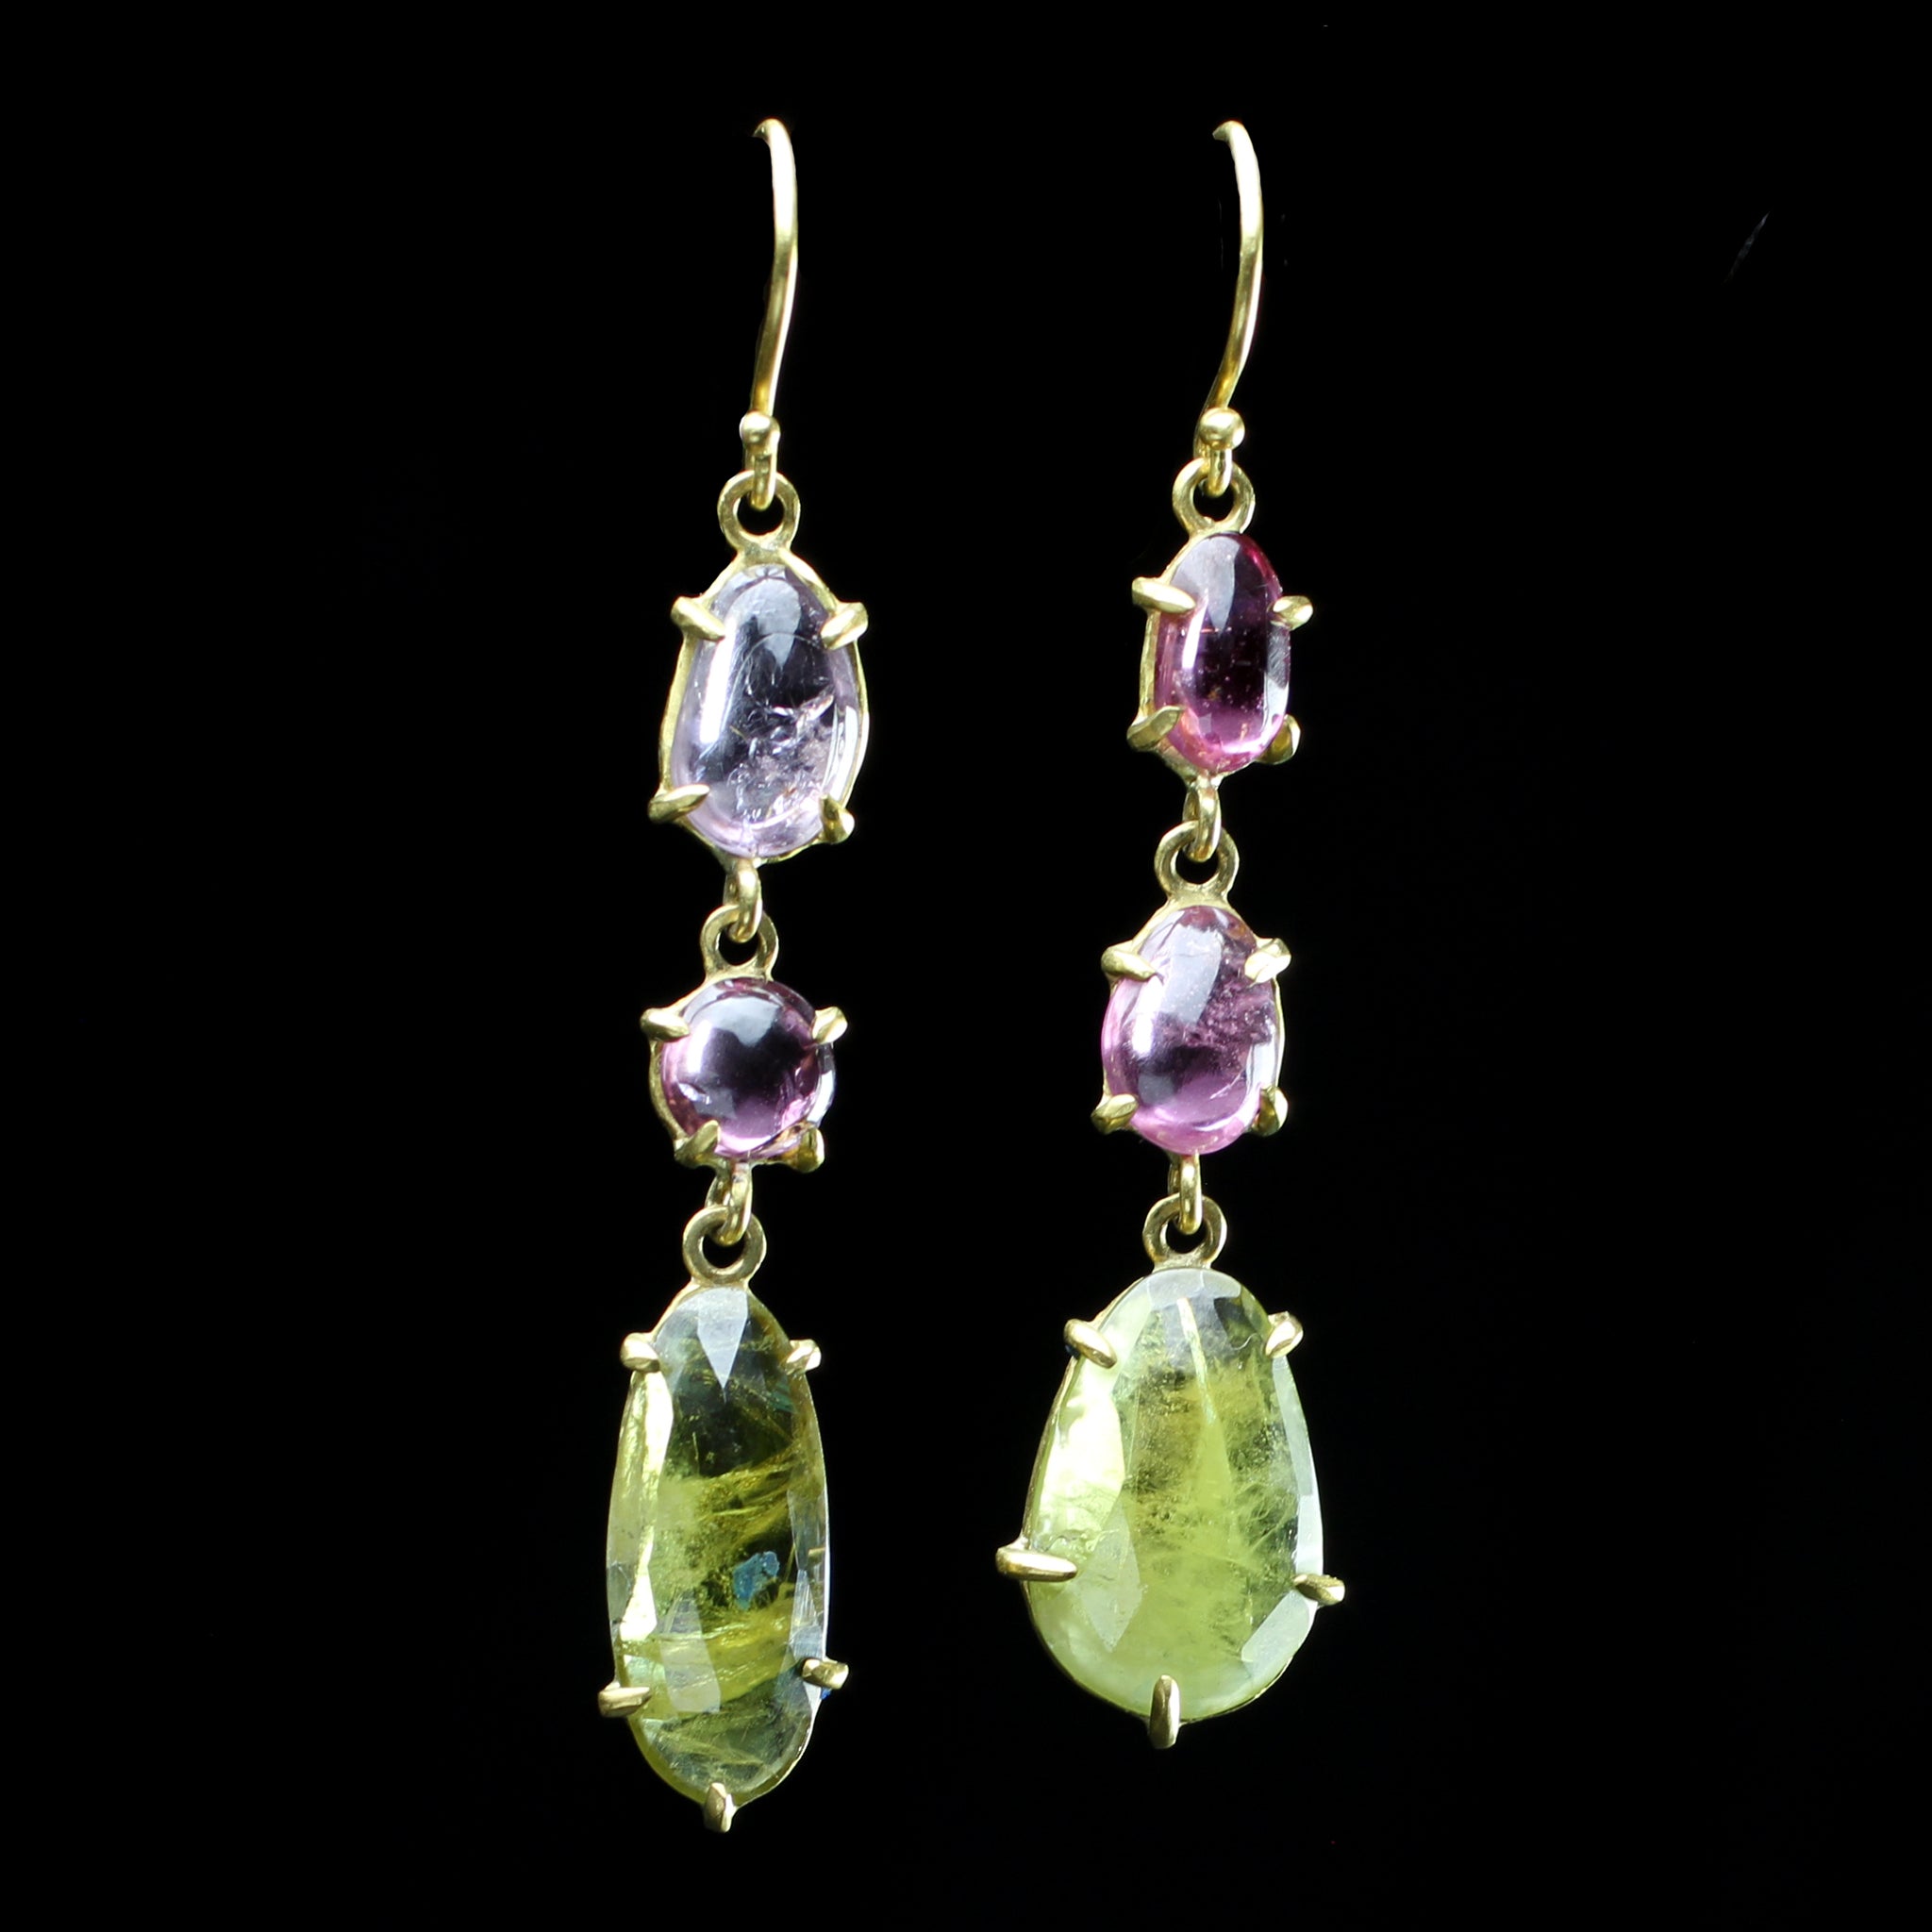 Pink and purple spinel stone hearrings hand made by jewelry designer margery Hirschey